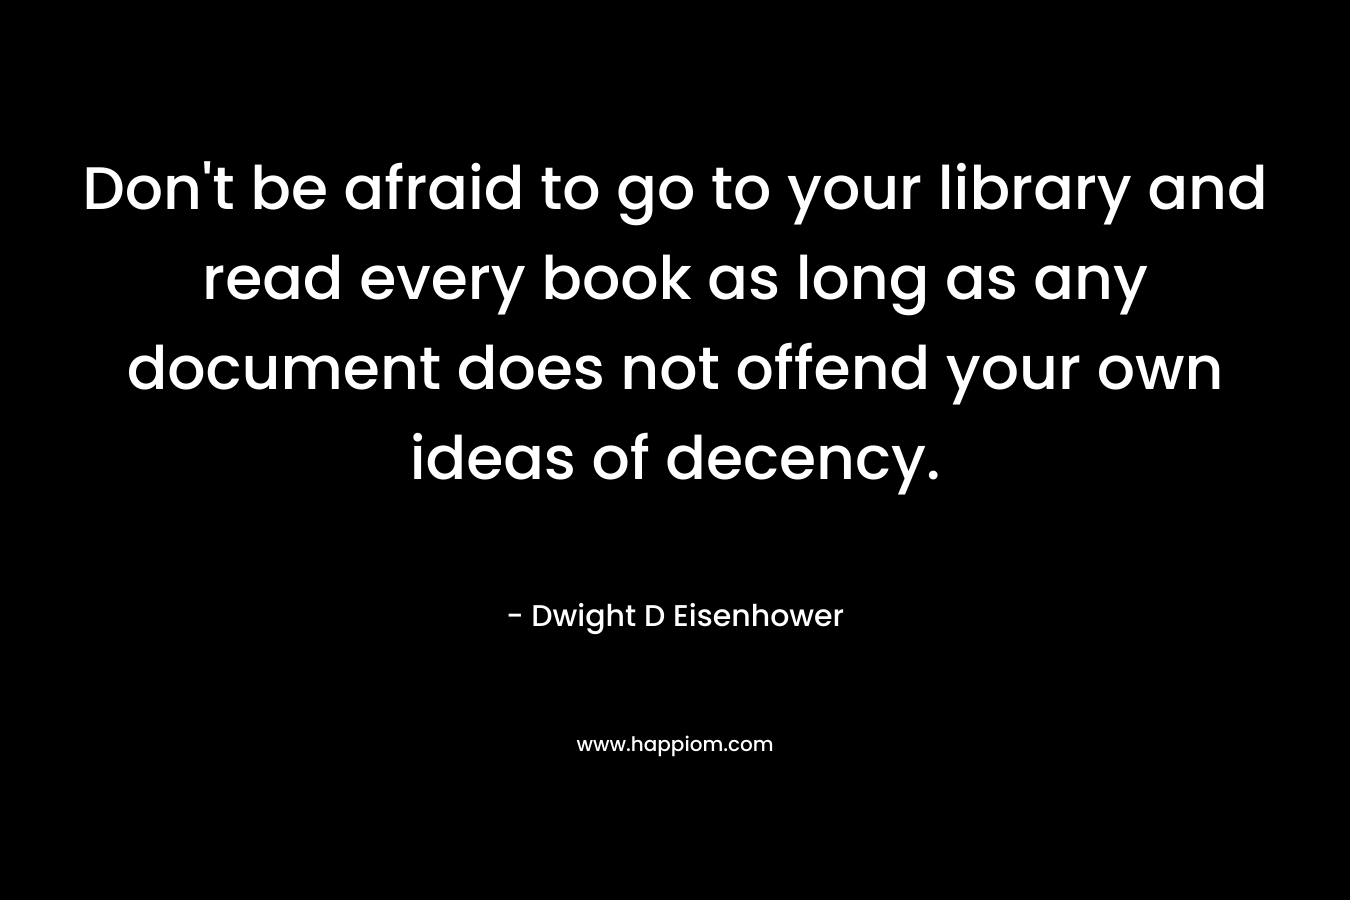 Don't be afraid to go to your library and read every book as long as any document does not offend your own ideas of decency.